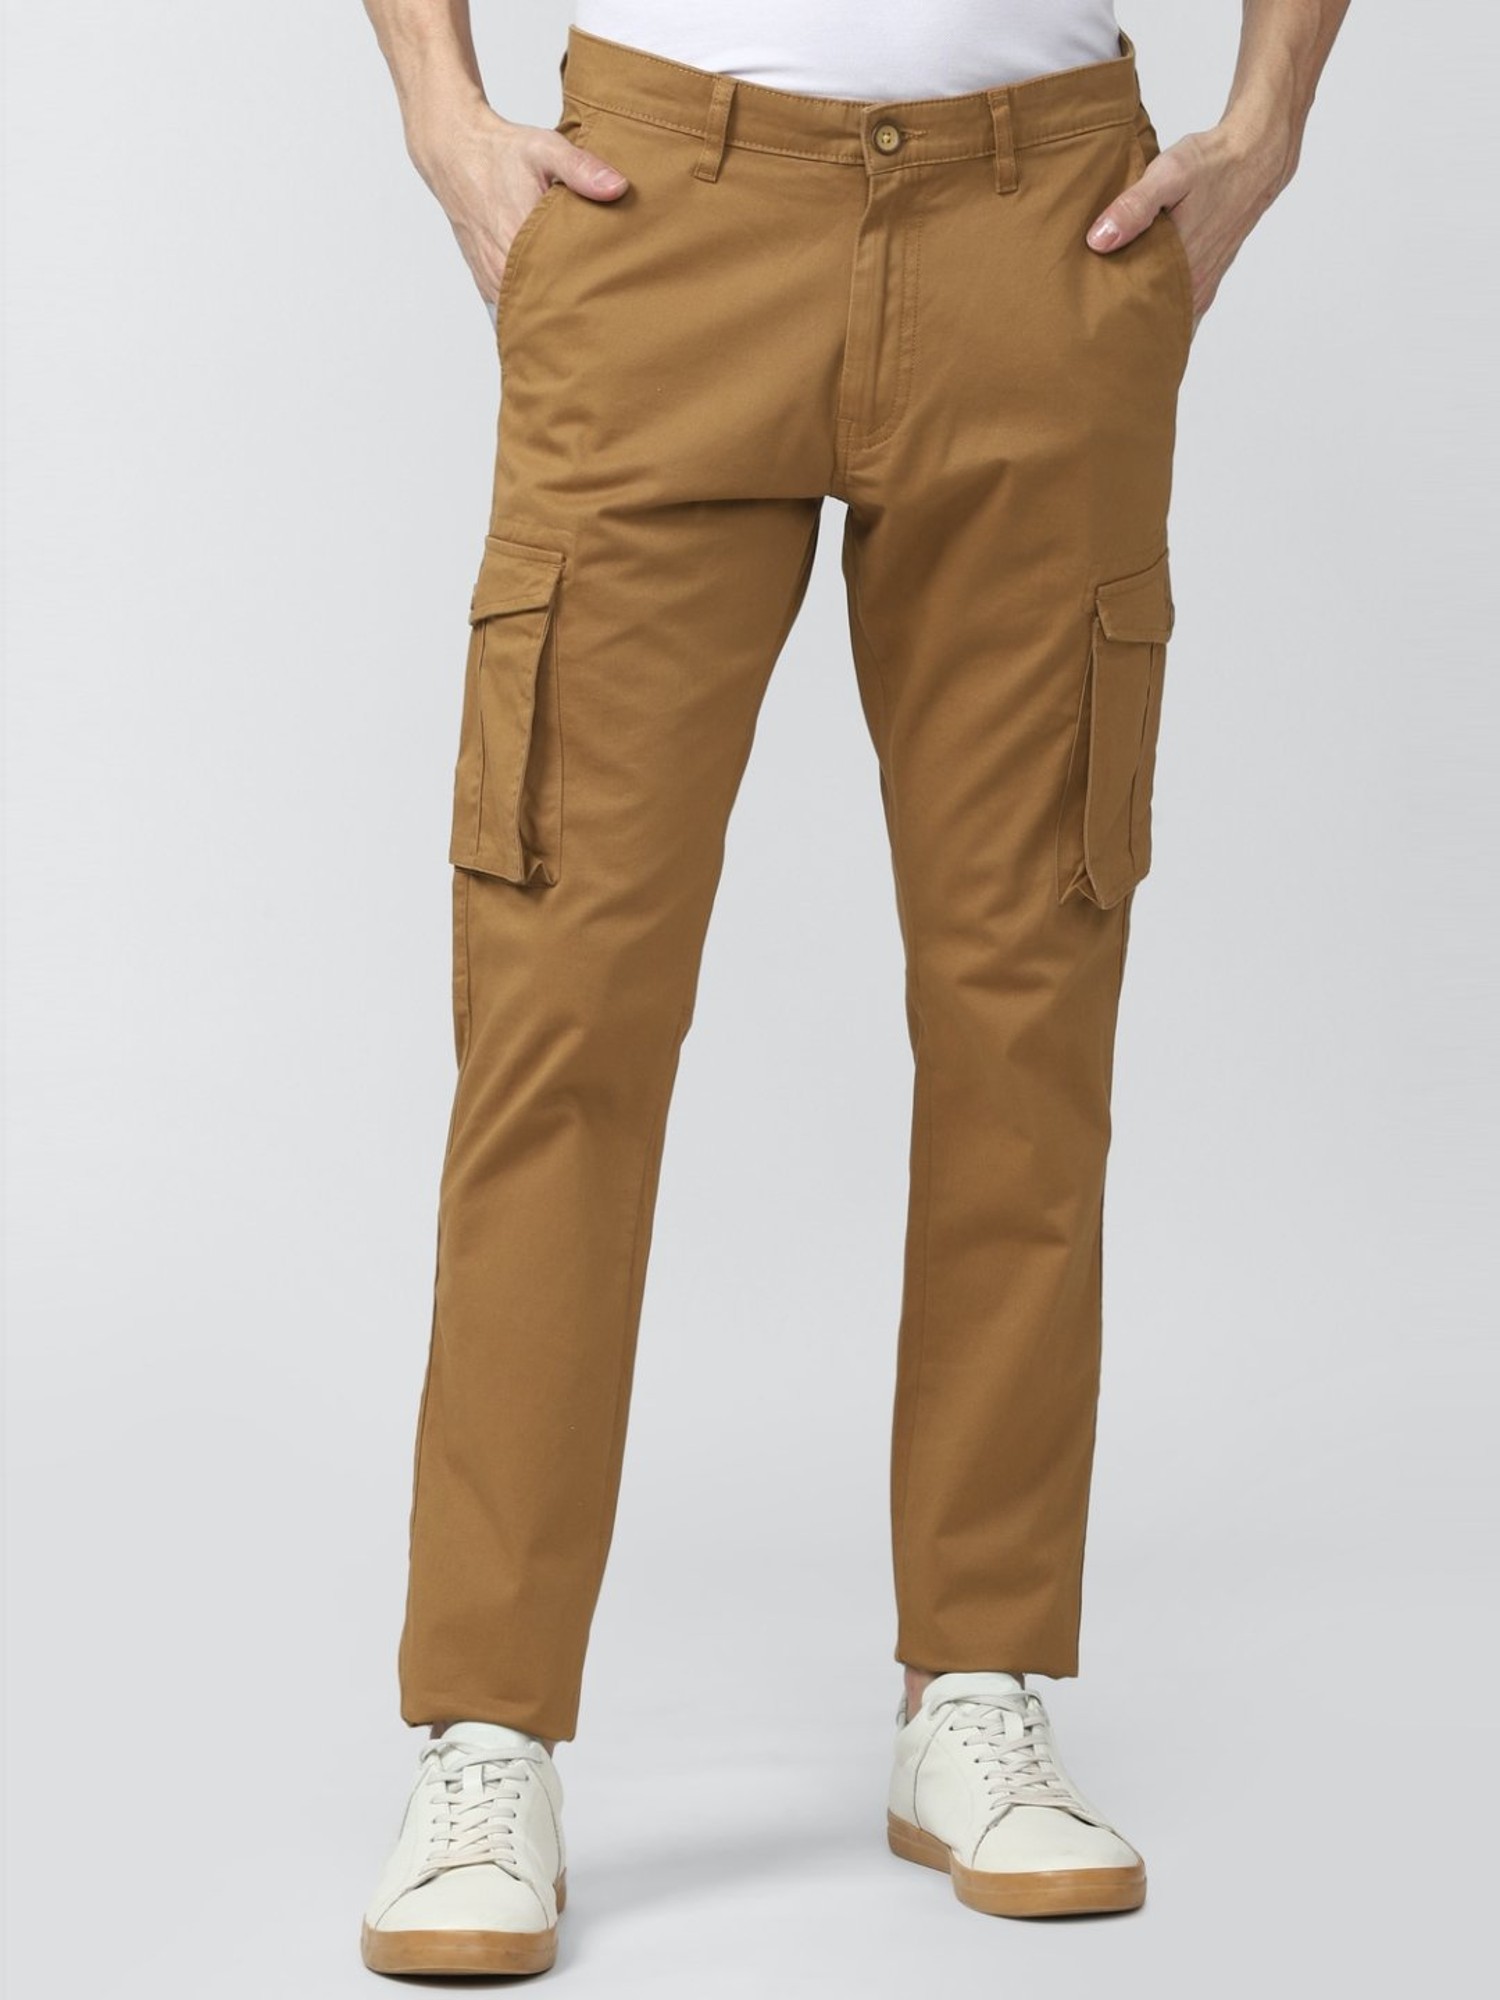 Peter England Jeans Jeans Casual Trousers  Buy Peter England Jeans Solid  Khaki Casual Trousers Online  Nykaa Fashion